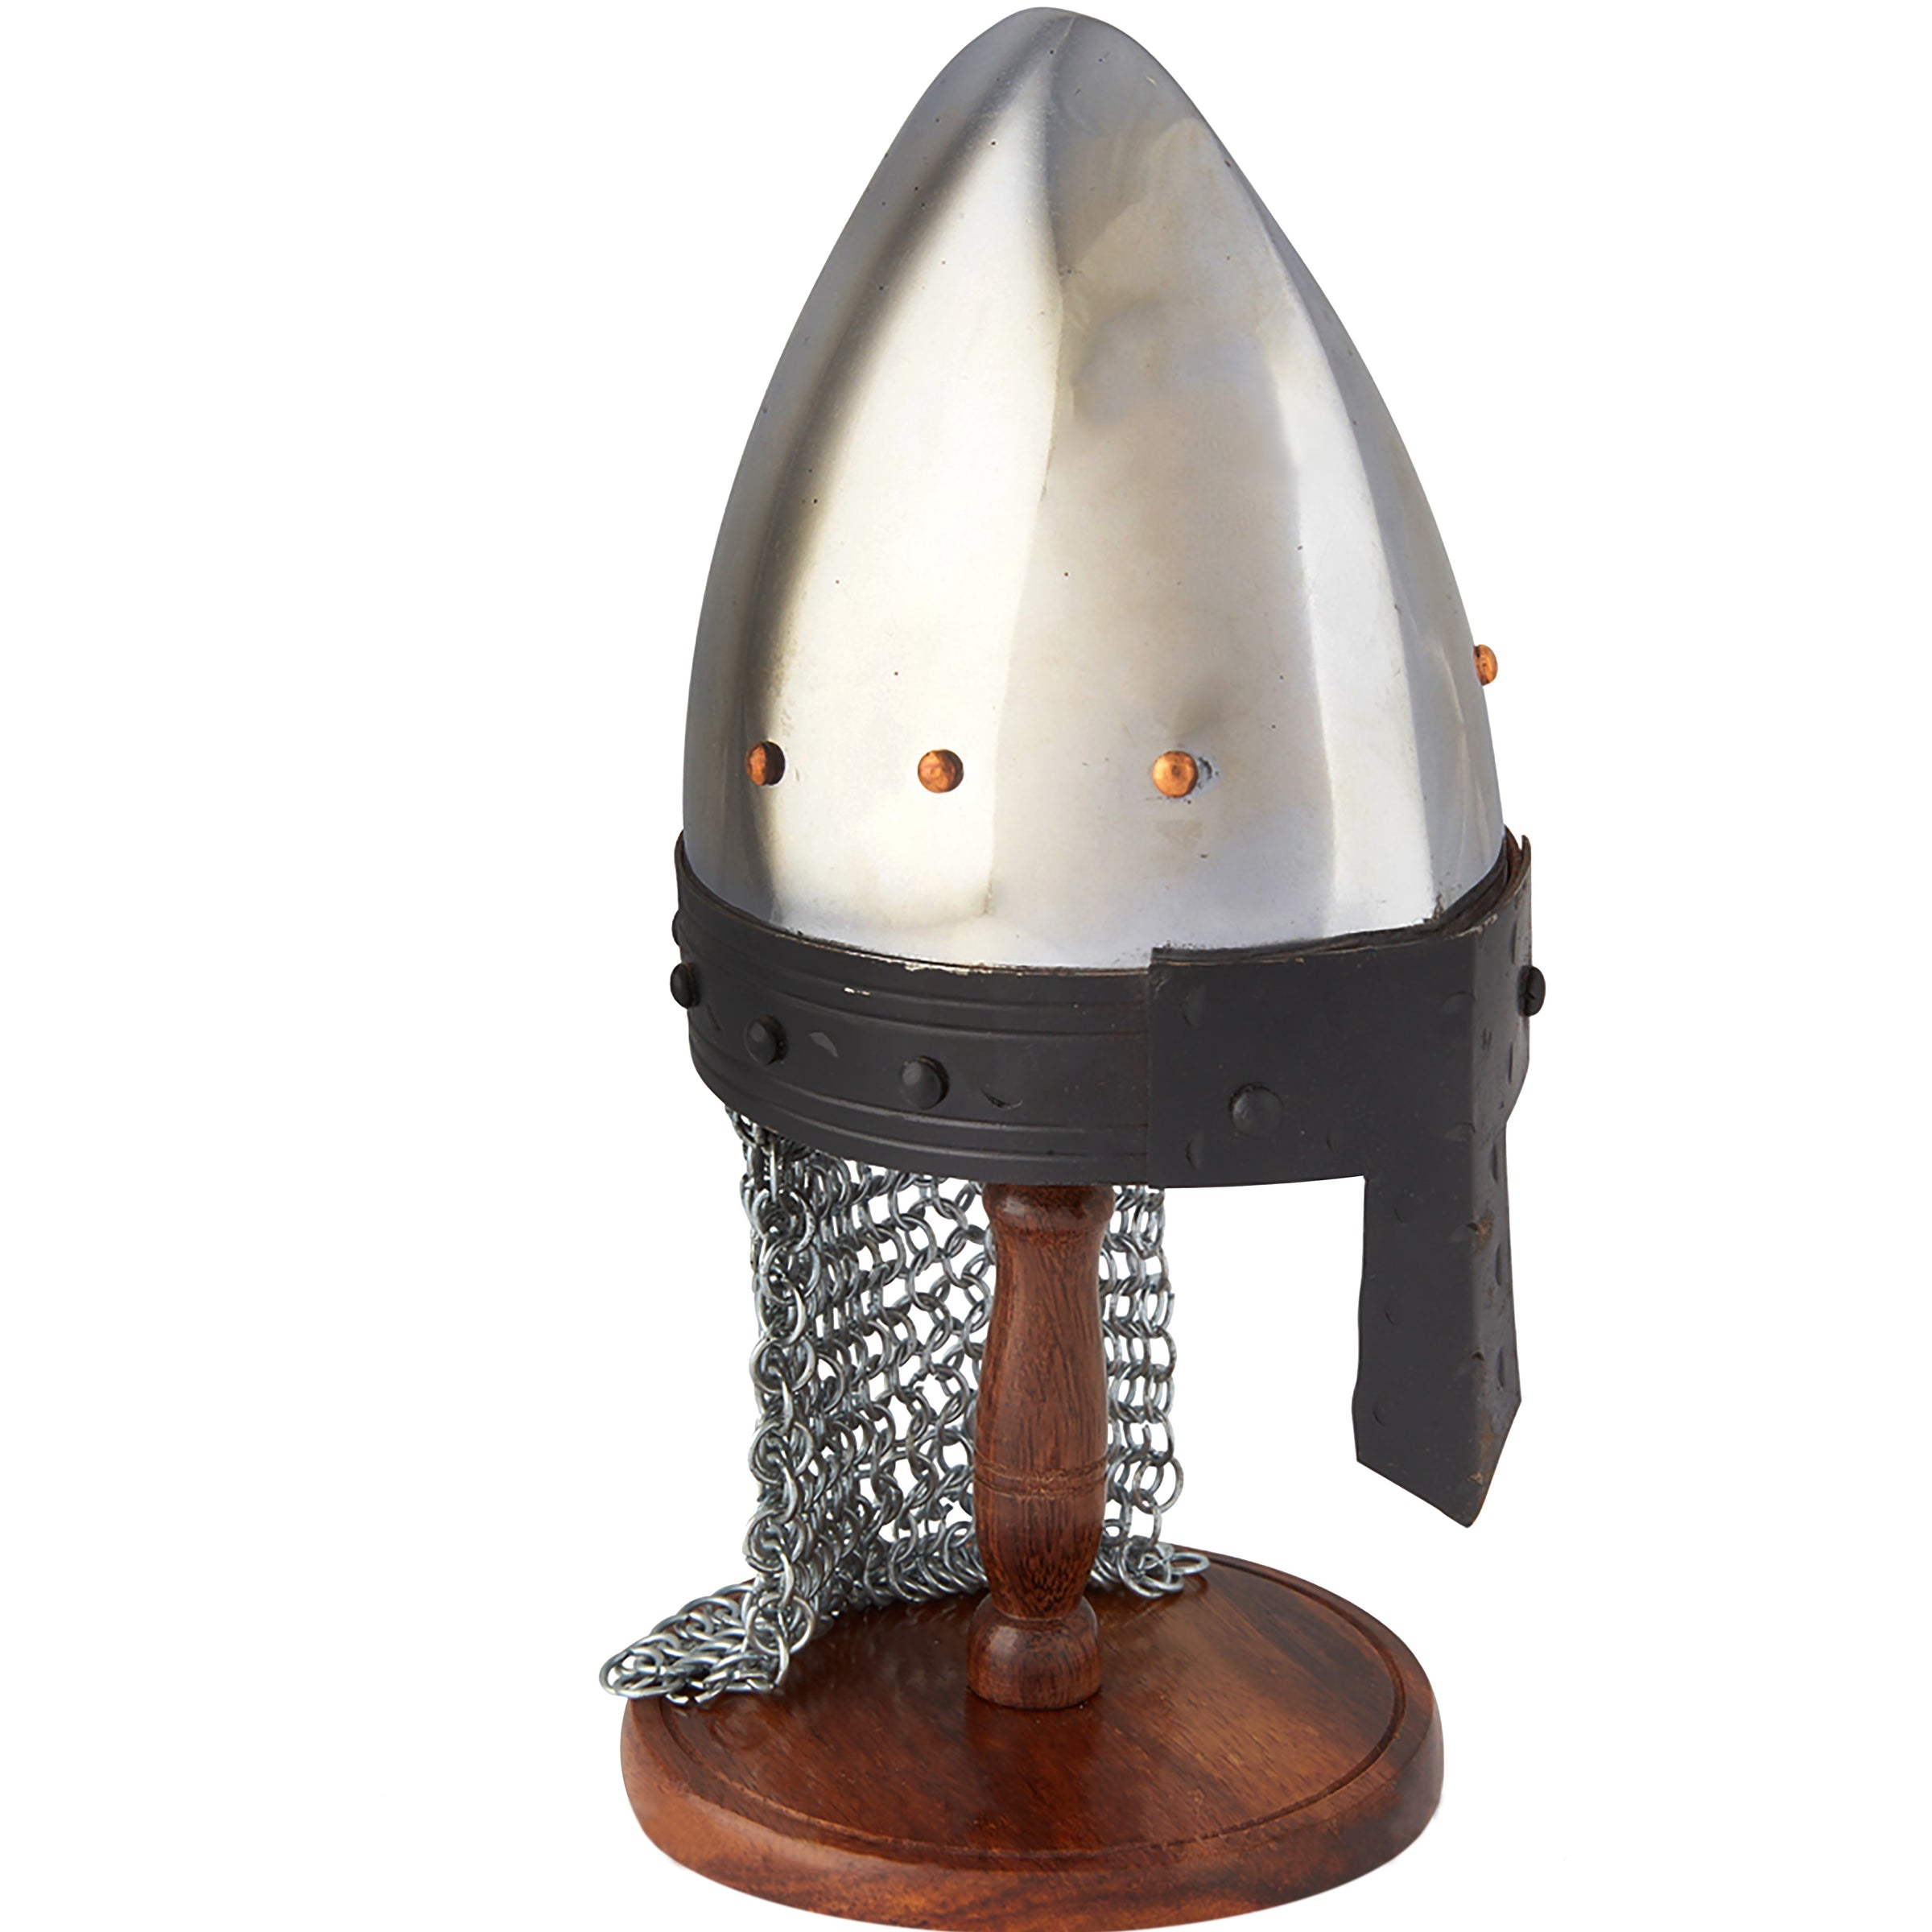 Miniature Medieval Norman Nasal Helmet with Wooden Stand - Notbrand